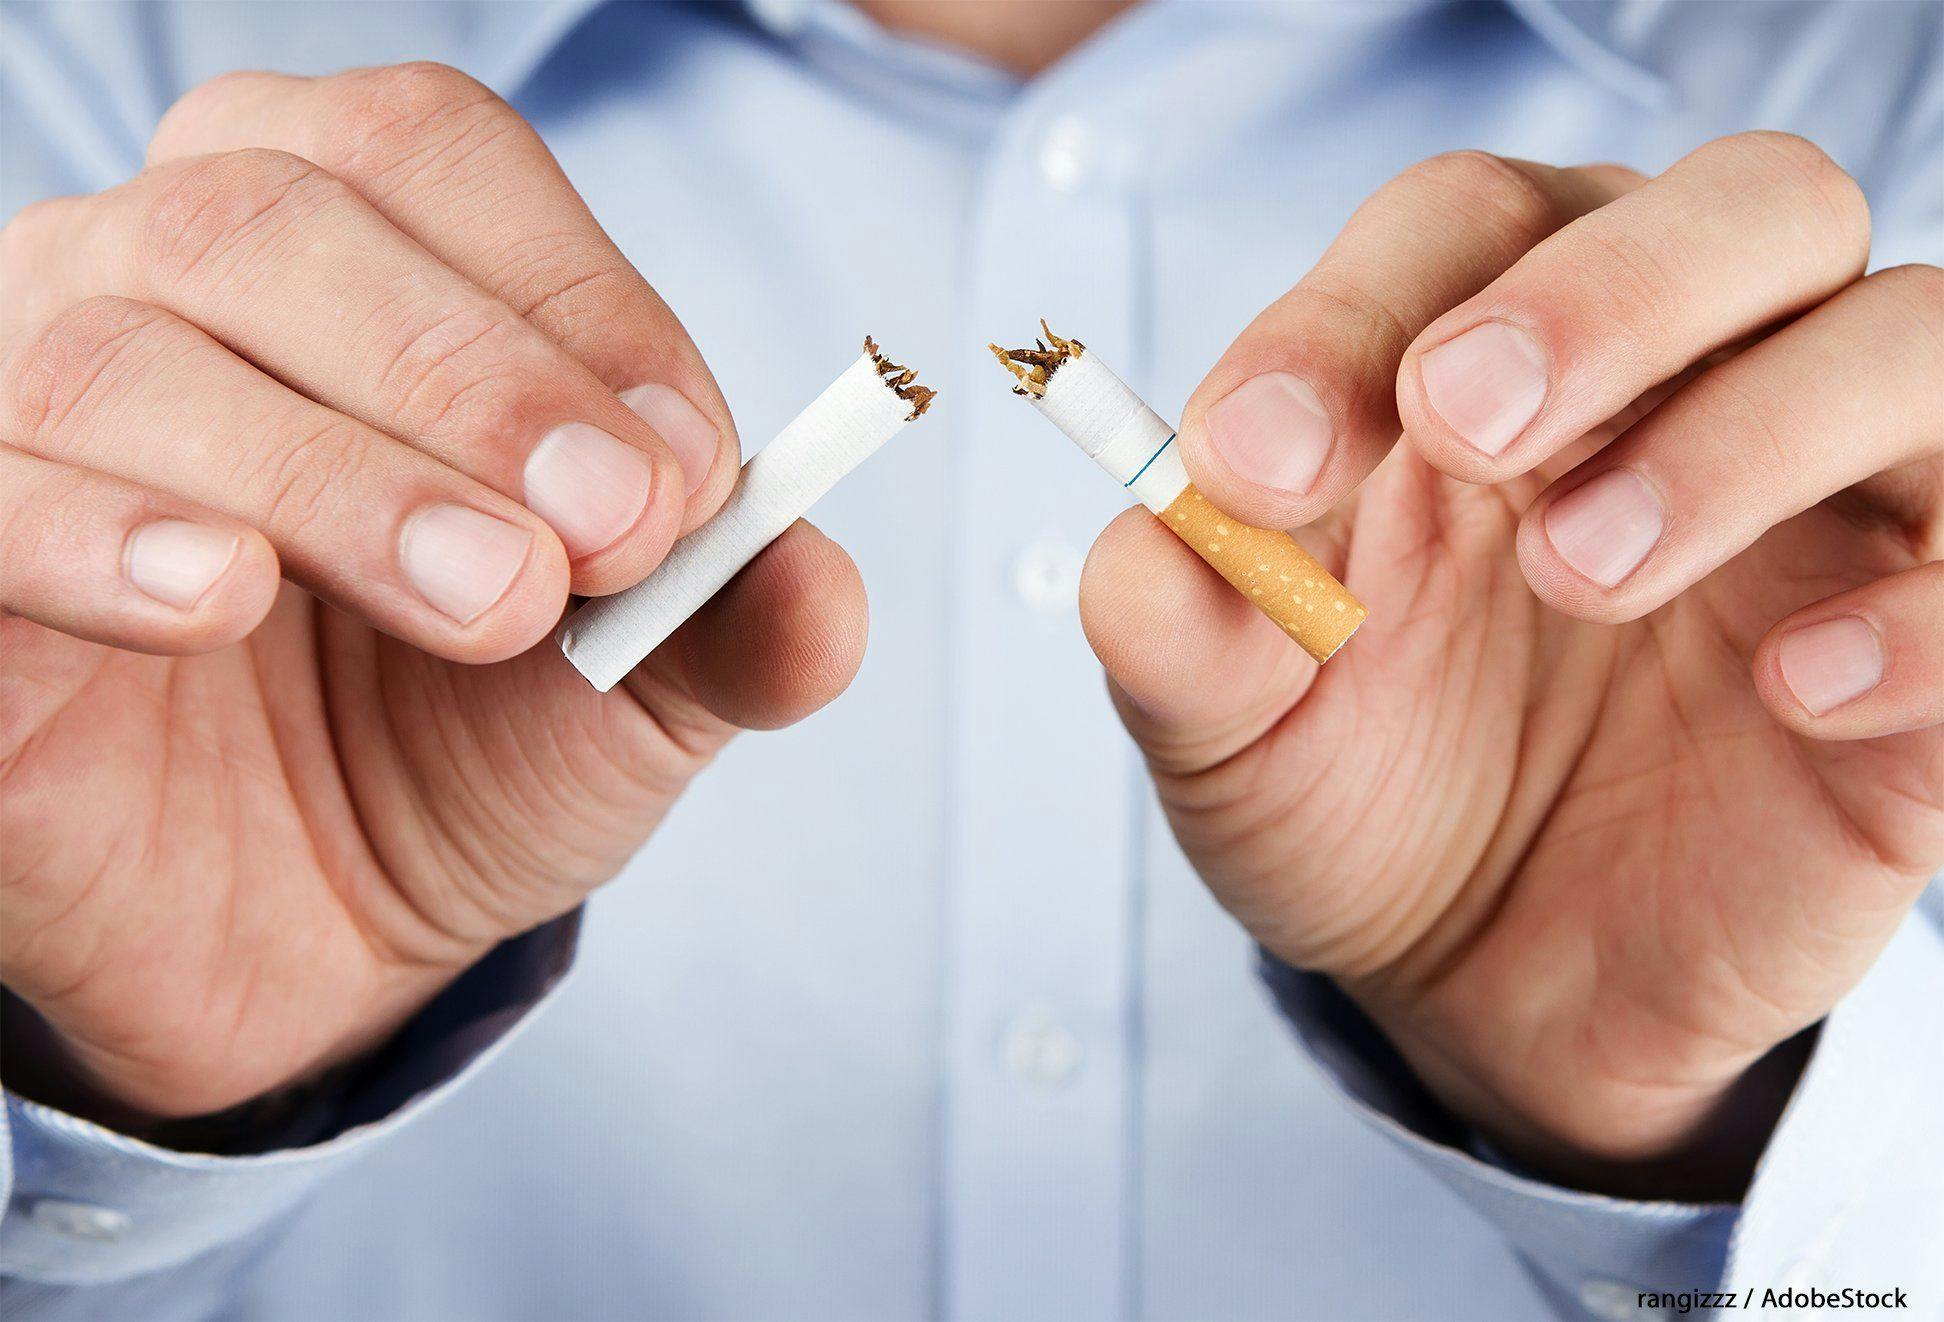 Individuals Who Stop Smoking at Any Age Experience Regeneration of Lung Cells